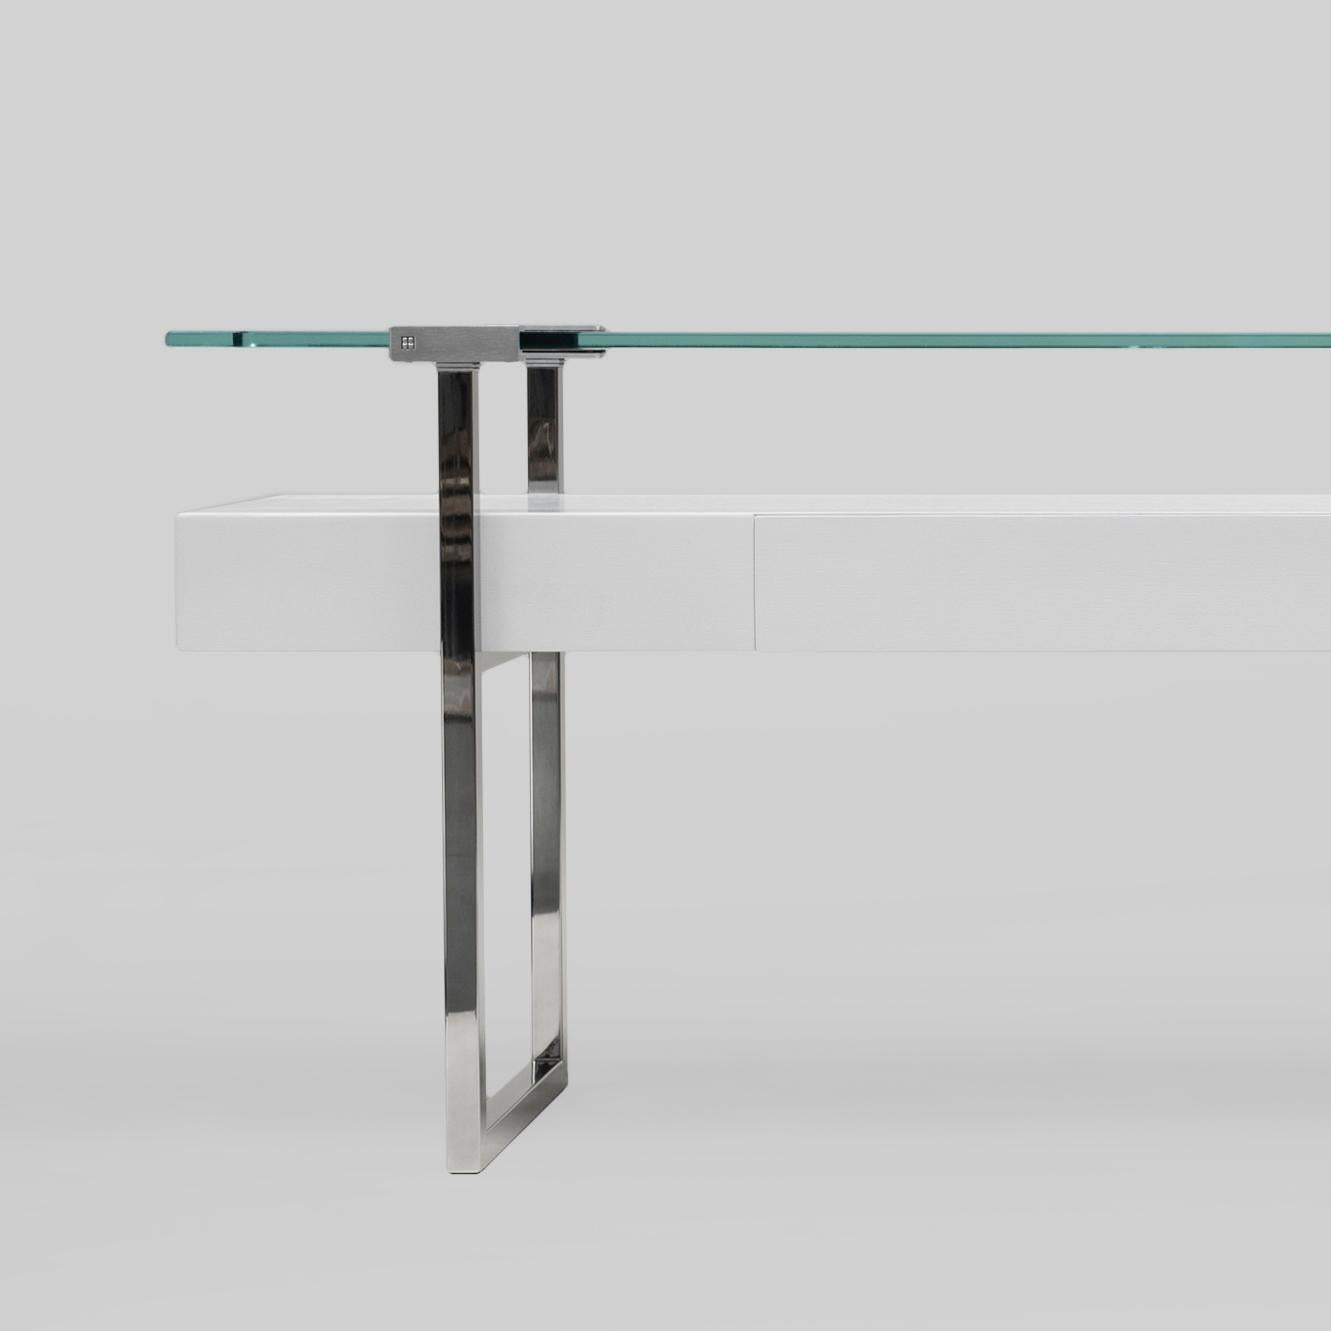 Console table designed by Peter Ghyczy in 2009.
Manufactured by Ghyczy, (Netherlands)

The twin frames are constructed of 3 × 3 square tubes and secured to the tabletop by cast metal details. Special feature is a solid wooden drawer. The strong